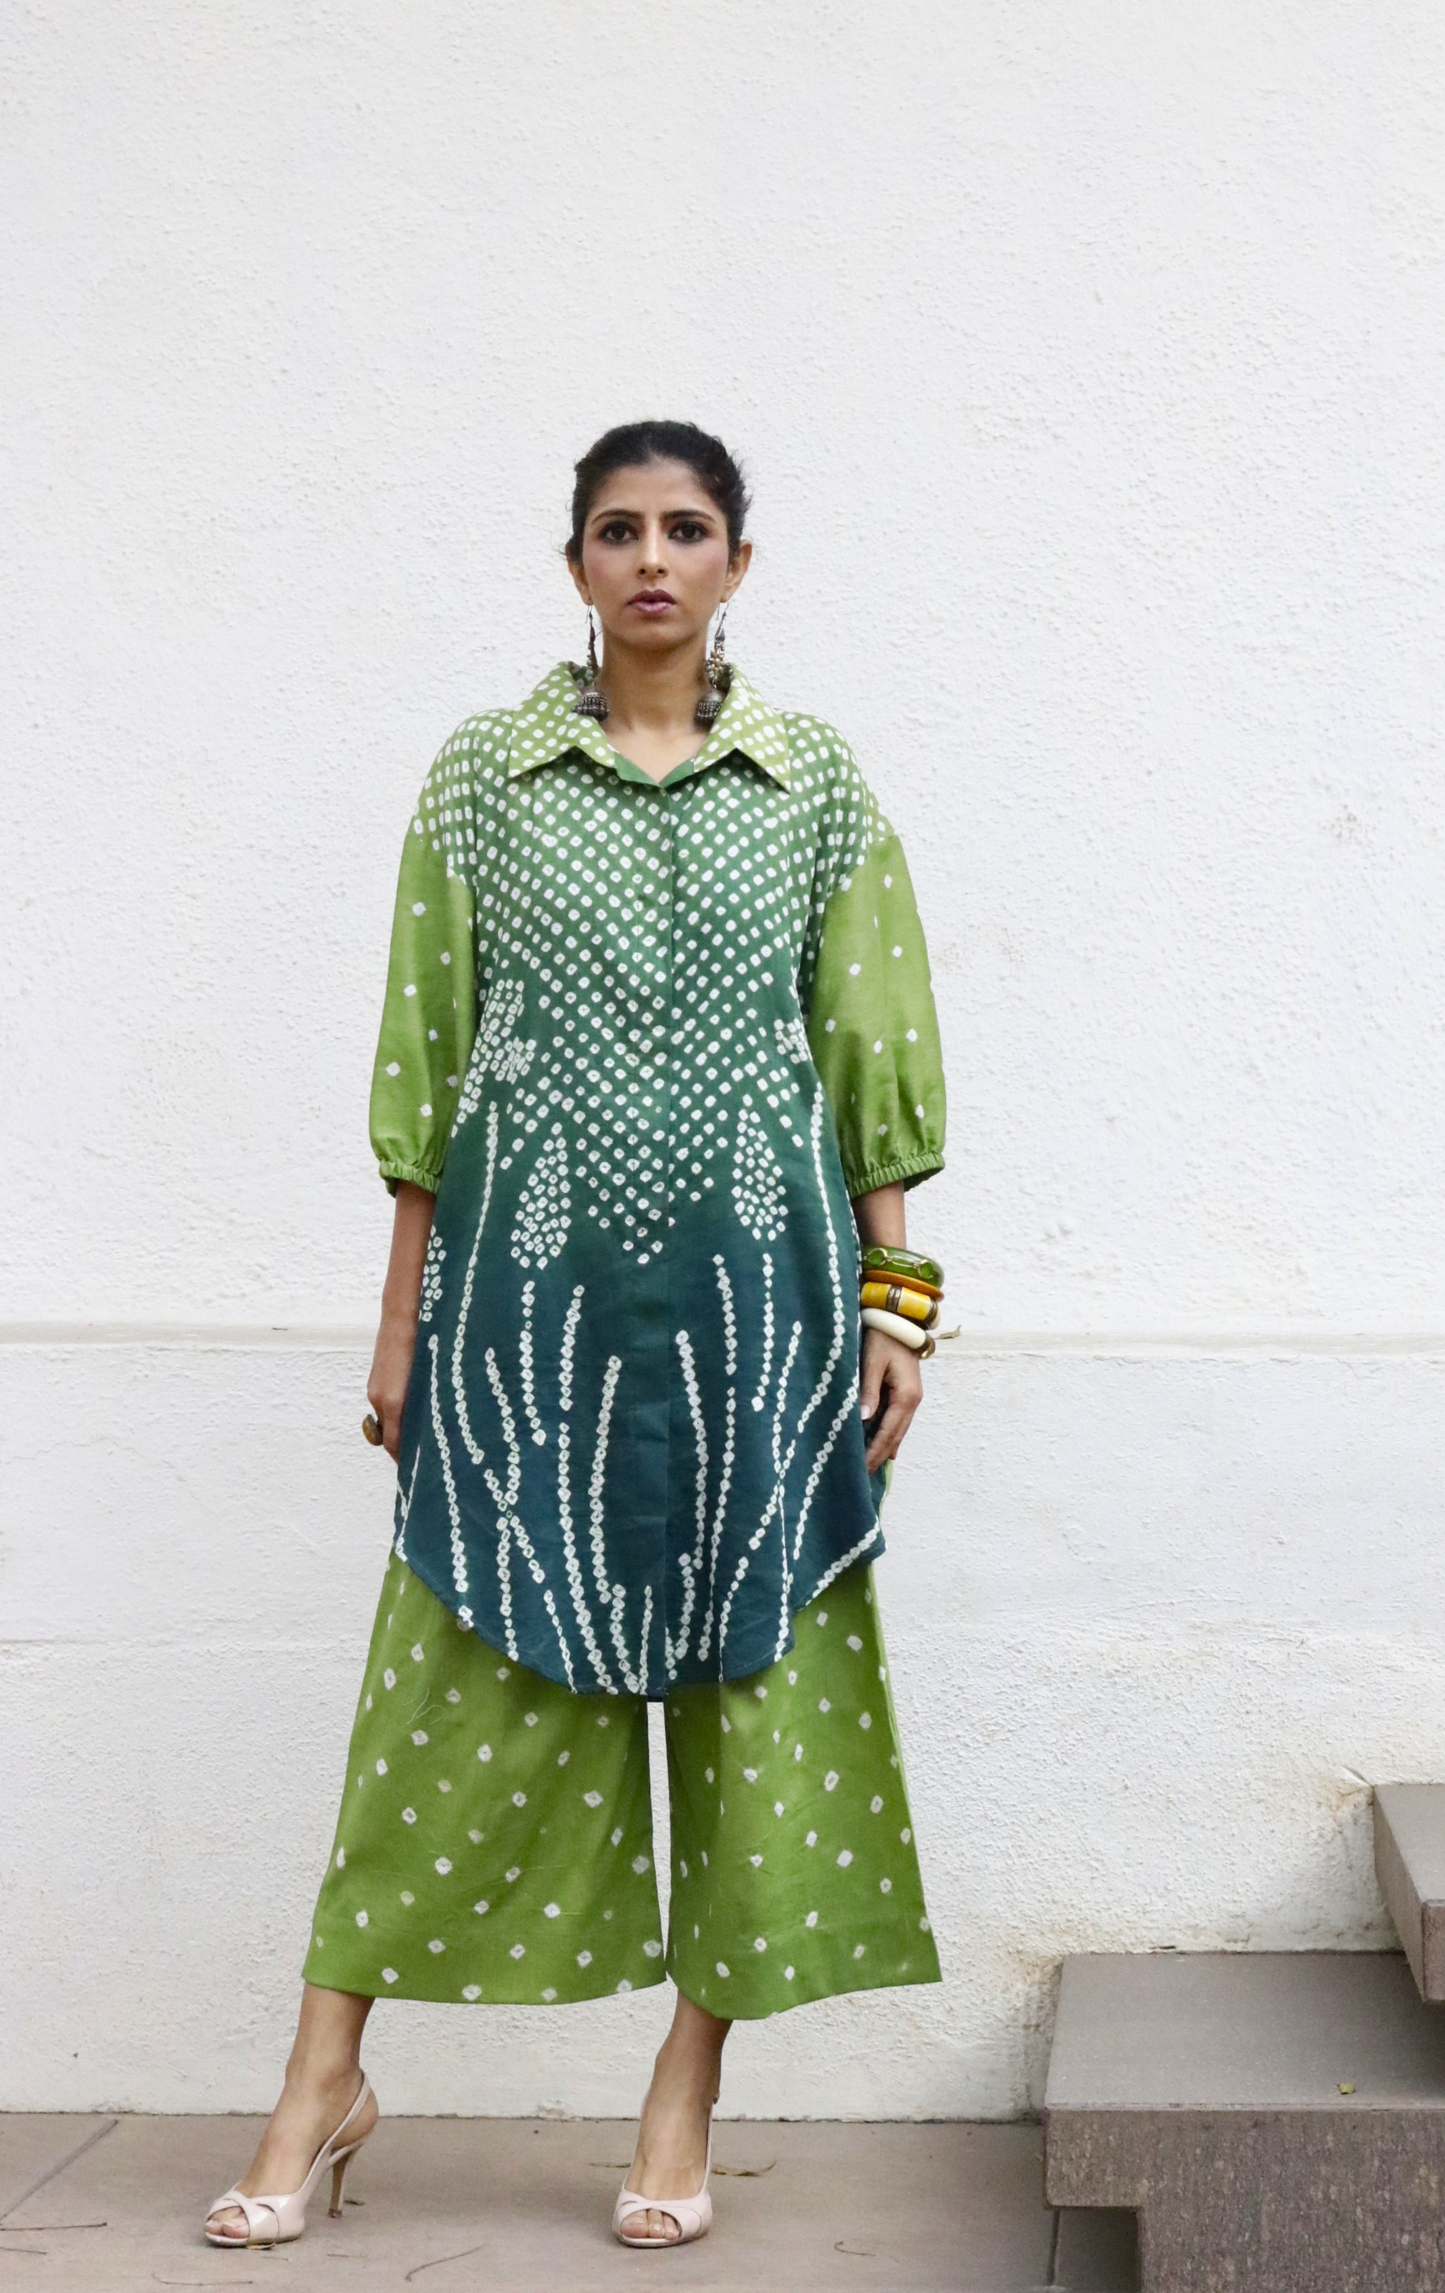 Bandhani 'Green Grass' Cotton Co-ord Set In Green Ombre: Buy Kurta Palazzo Cotton Co-ord Set